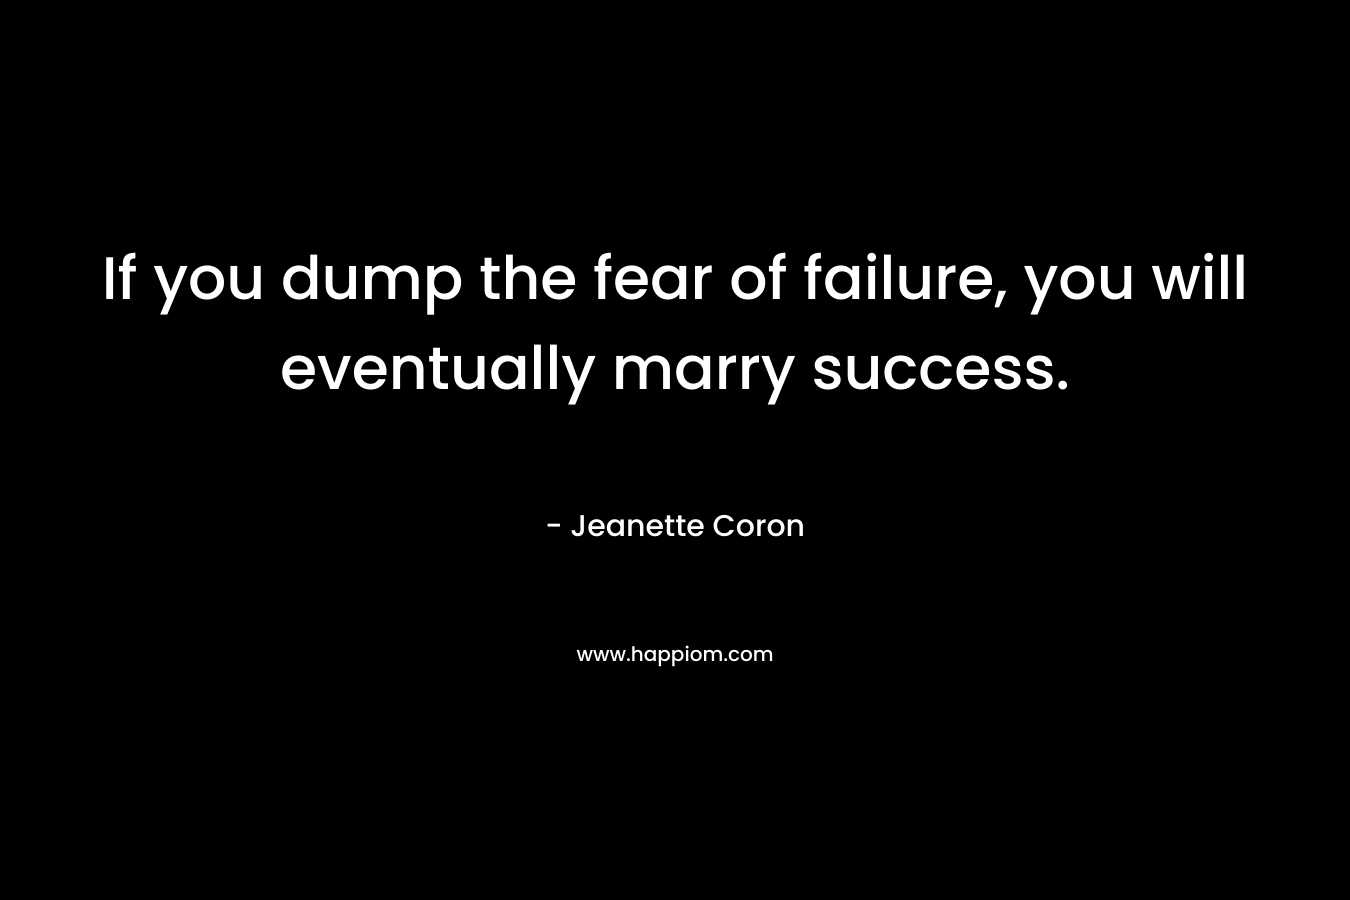 If you dump the fear of failure, you will eventually marry success.